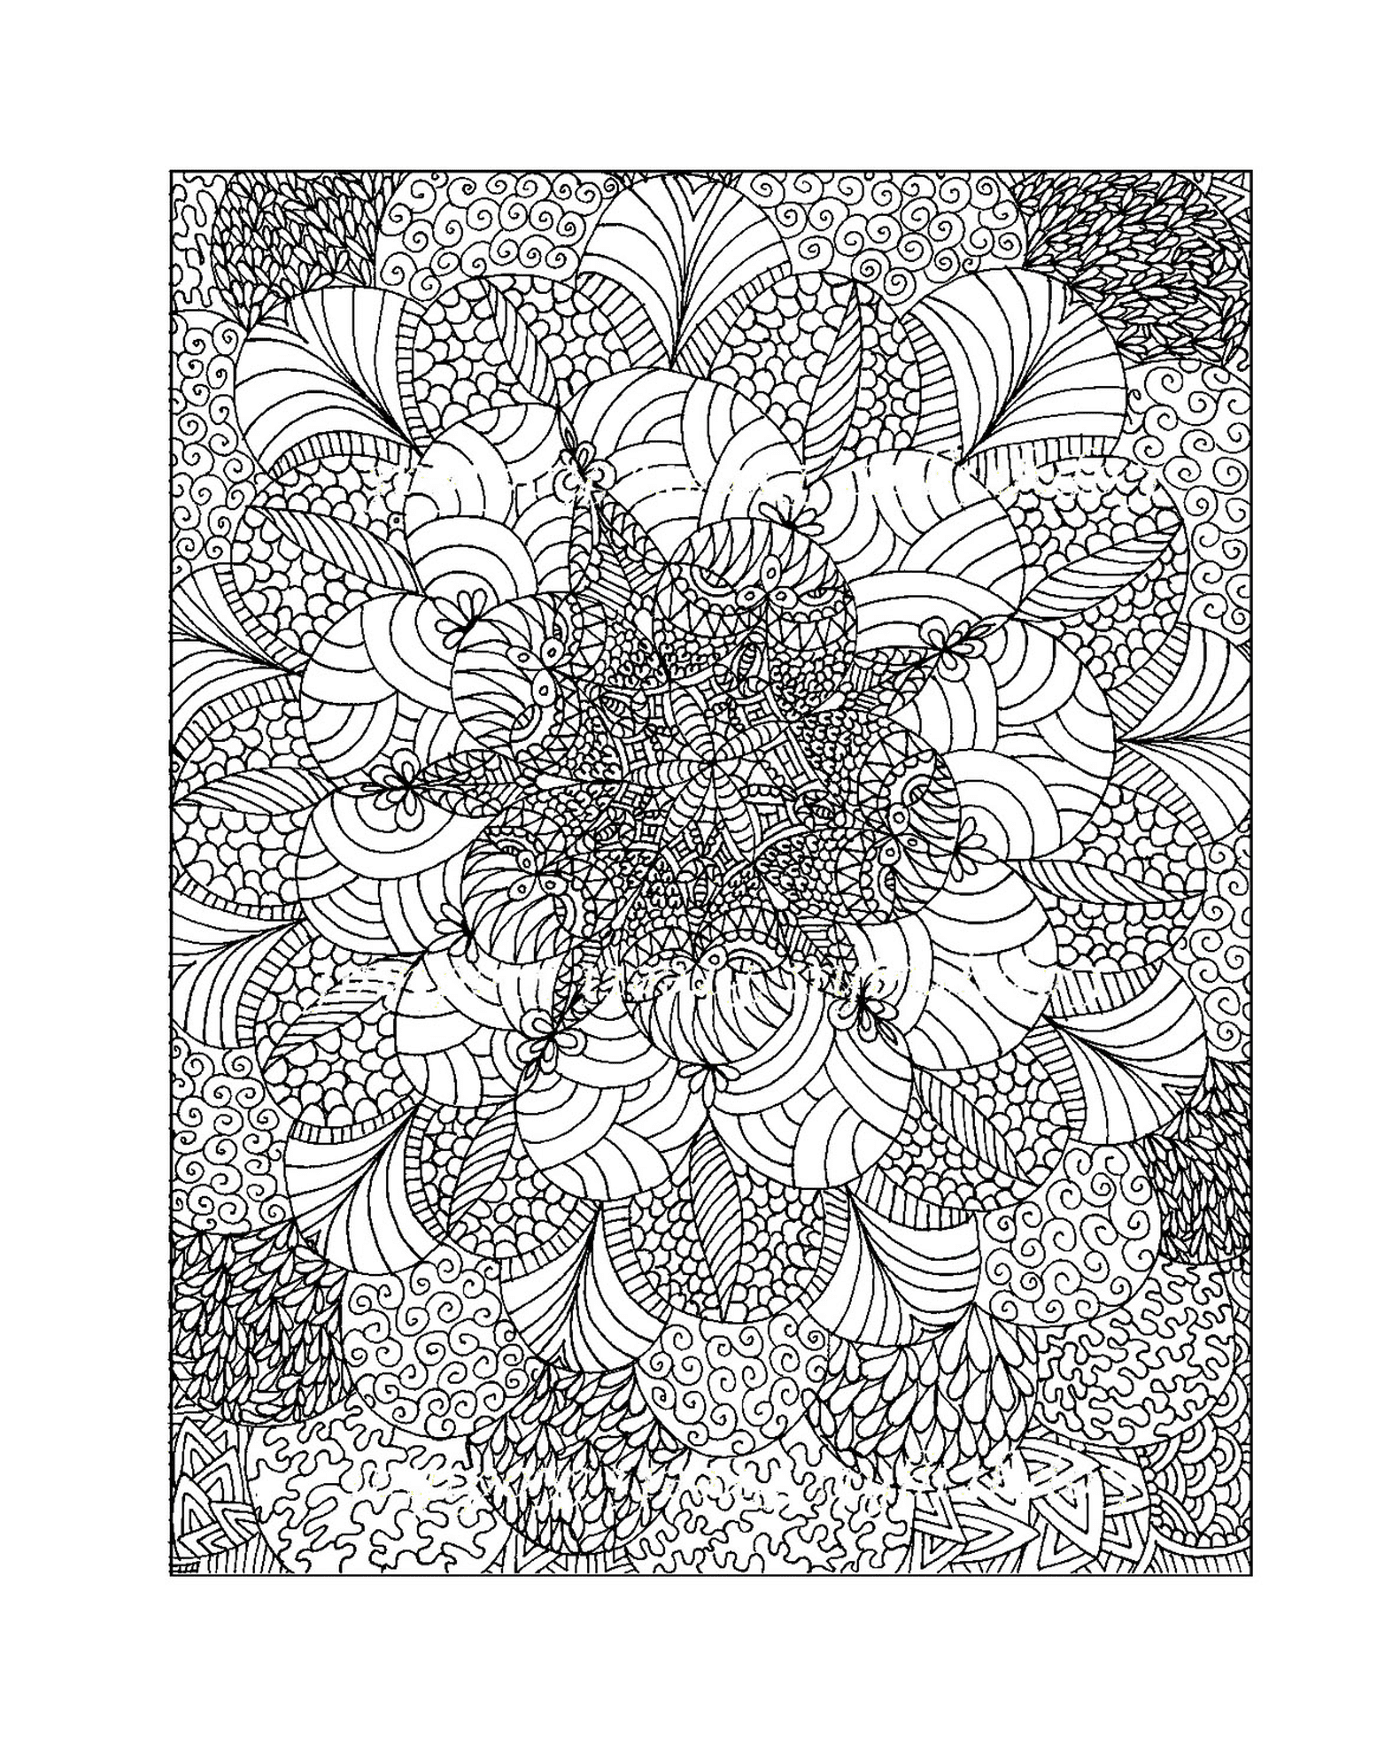  Drawing of complex flowers 